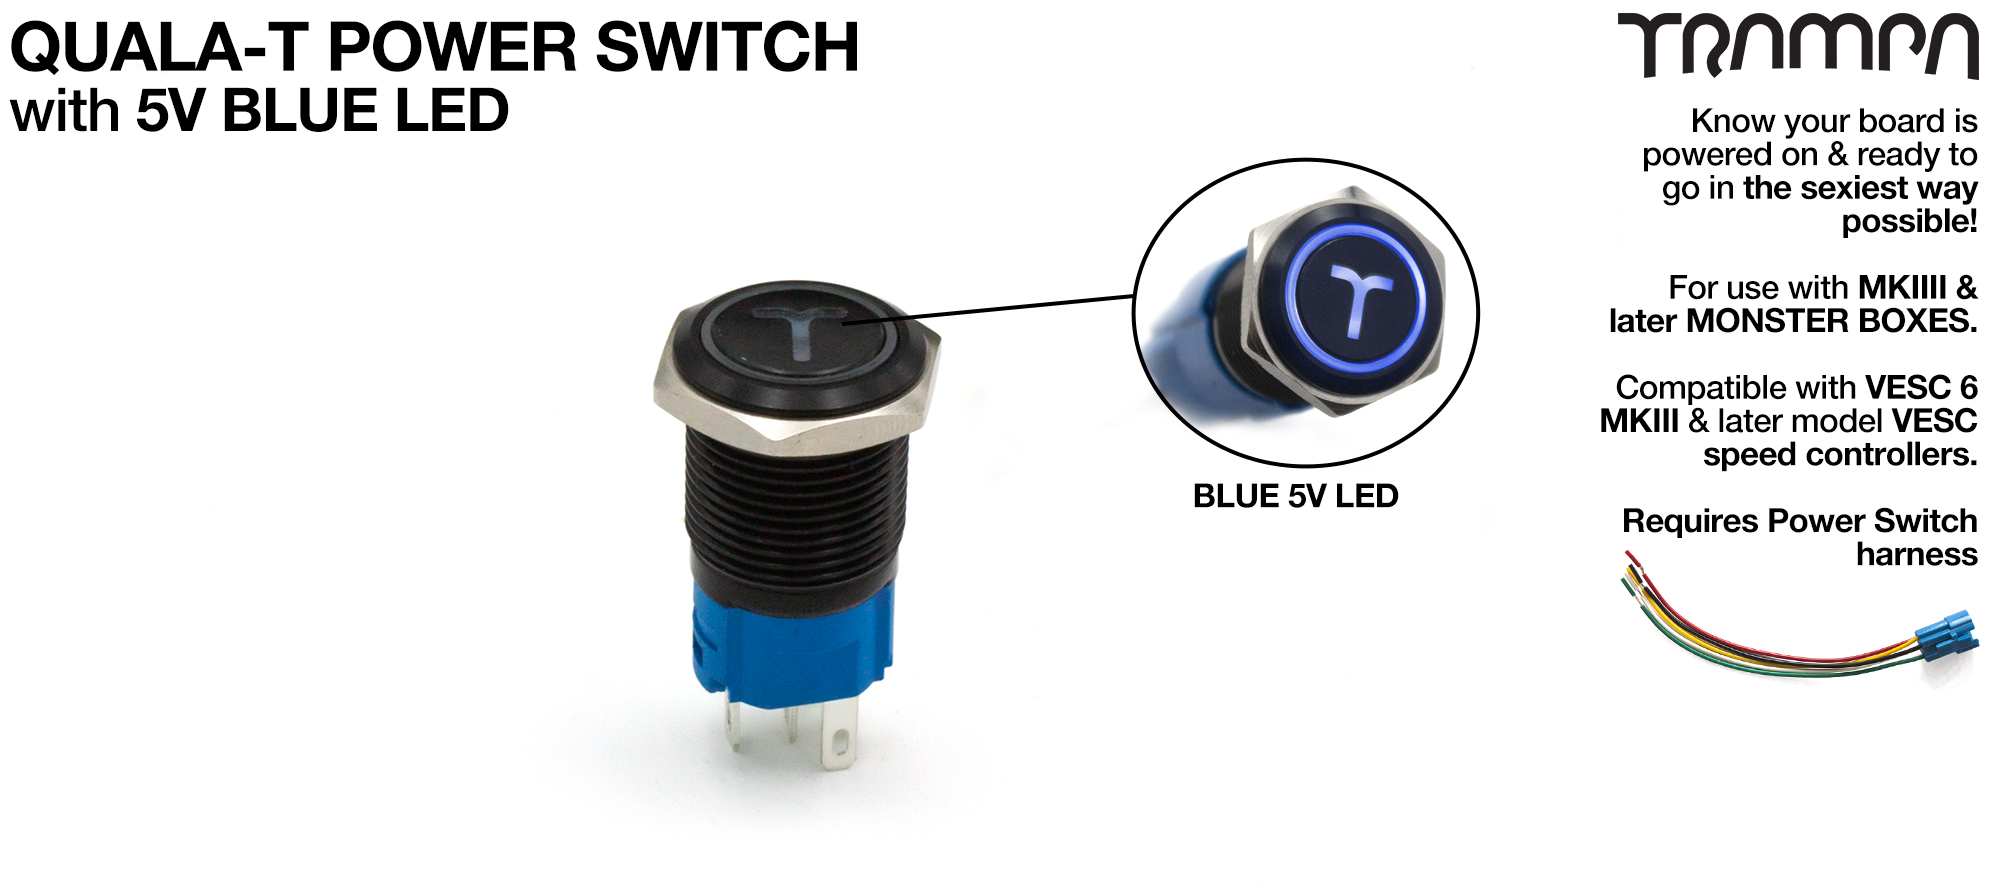 TRAMPA Switch with 5V BLUE LED QUALA-T & 16mm Stainless Steel Fixing Nut 